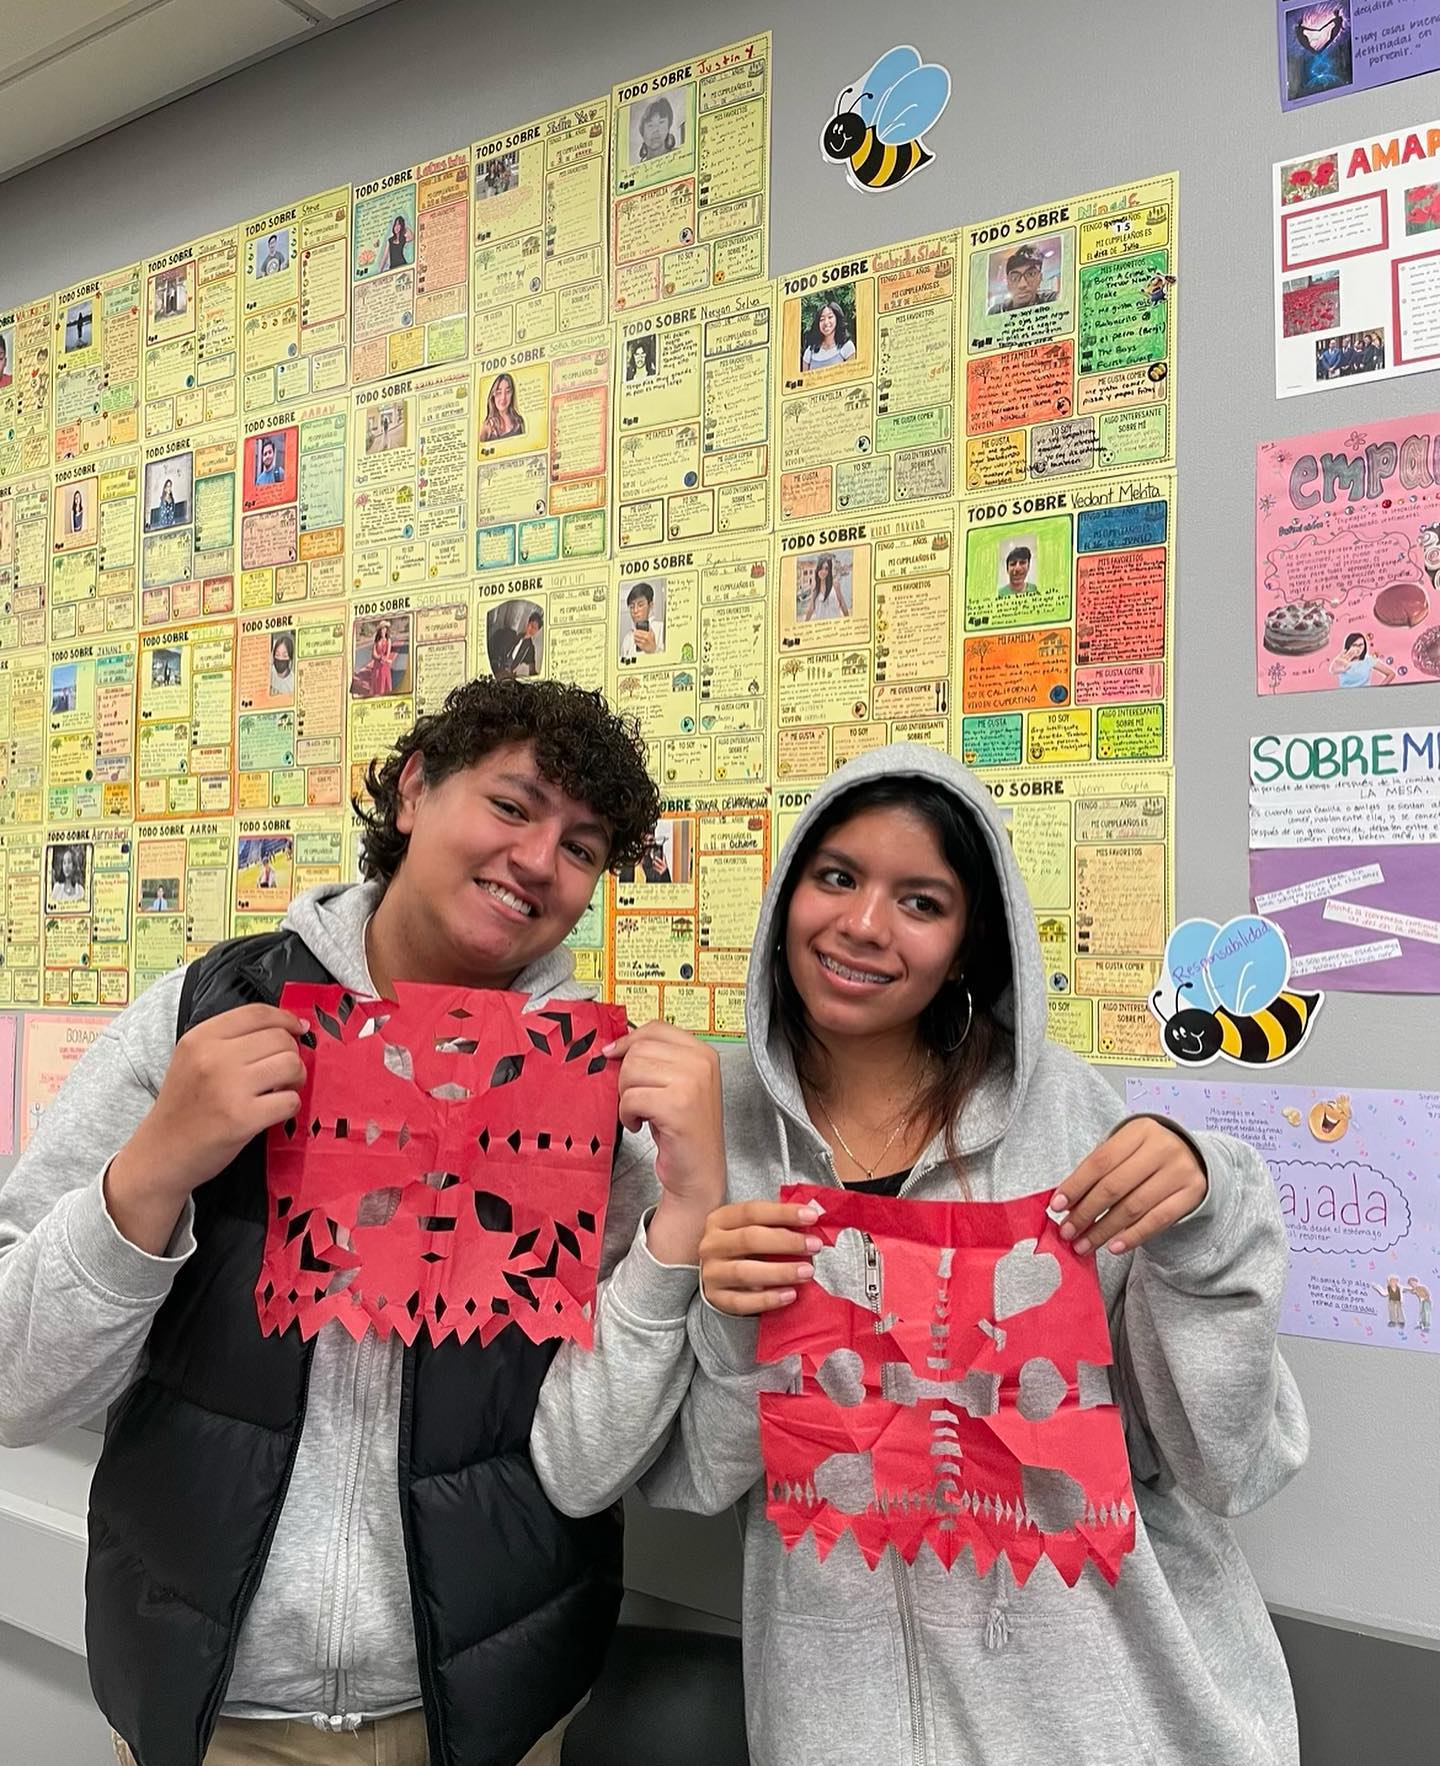 Members of Spanish Honor Society hold up papel picado they made to celebrate Día de los Muertos. Photo by Tanvi Parupalli | Used with permission